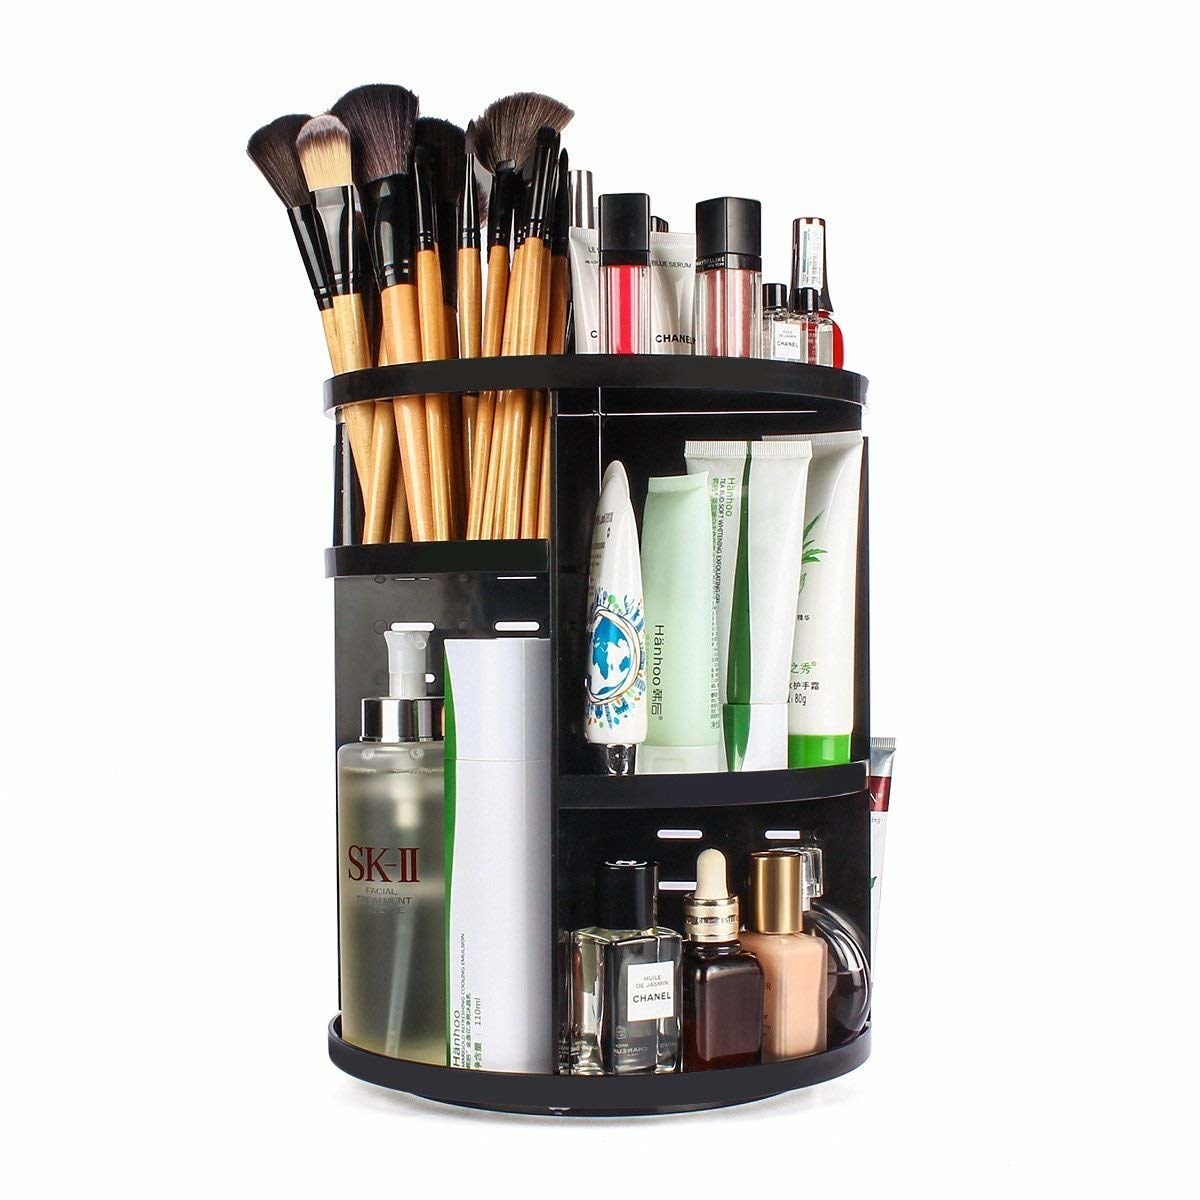 The rotating makeup organiser with makeup brushes, and other cosmetics stored in it.